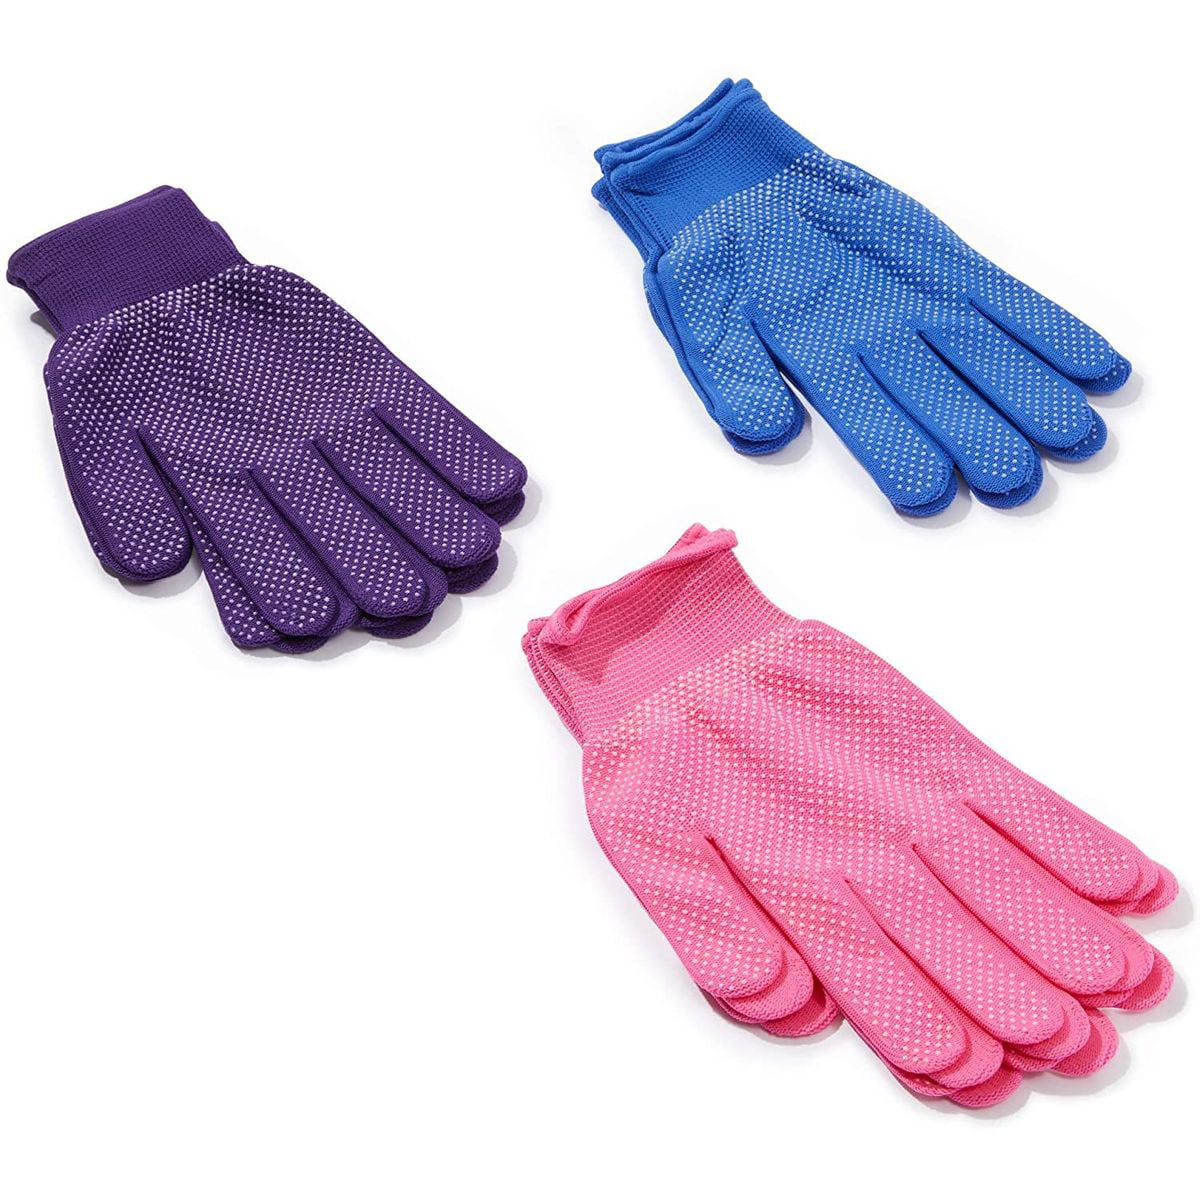 3x PAIRS CHILDS GRIPPER GLOVES BLUE KNITTED PIMPLE PALM Horse Riding Cycling 